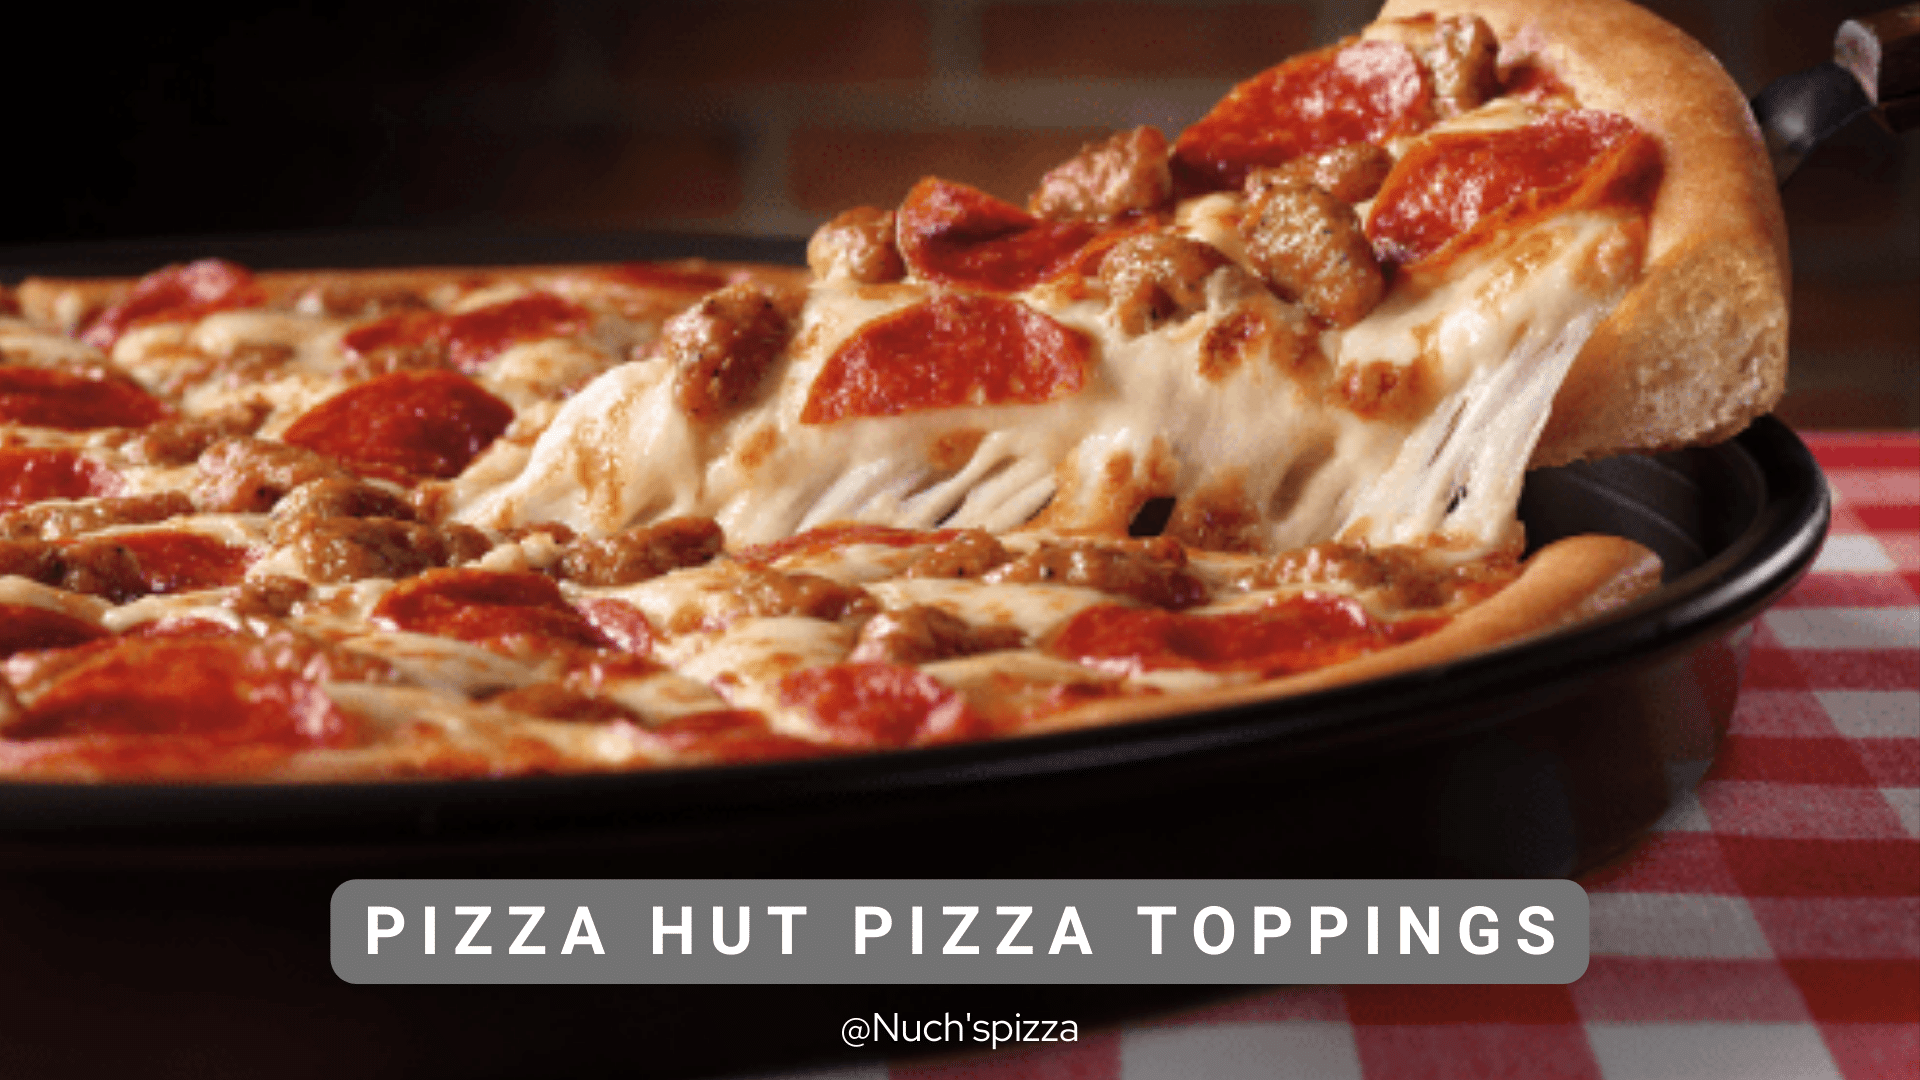 Pizza Hut pizza toppings